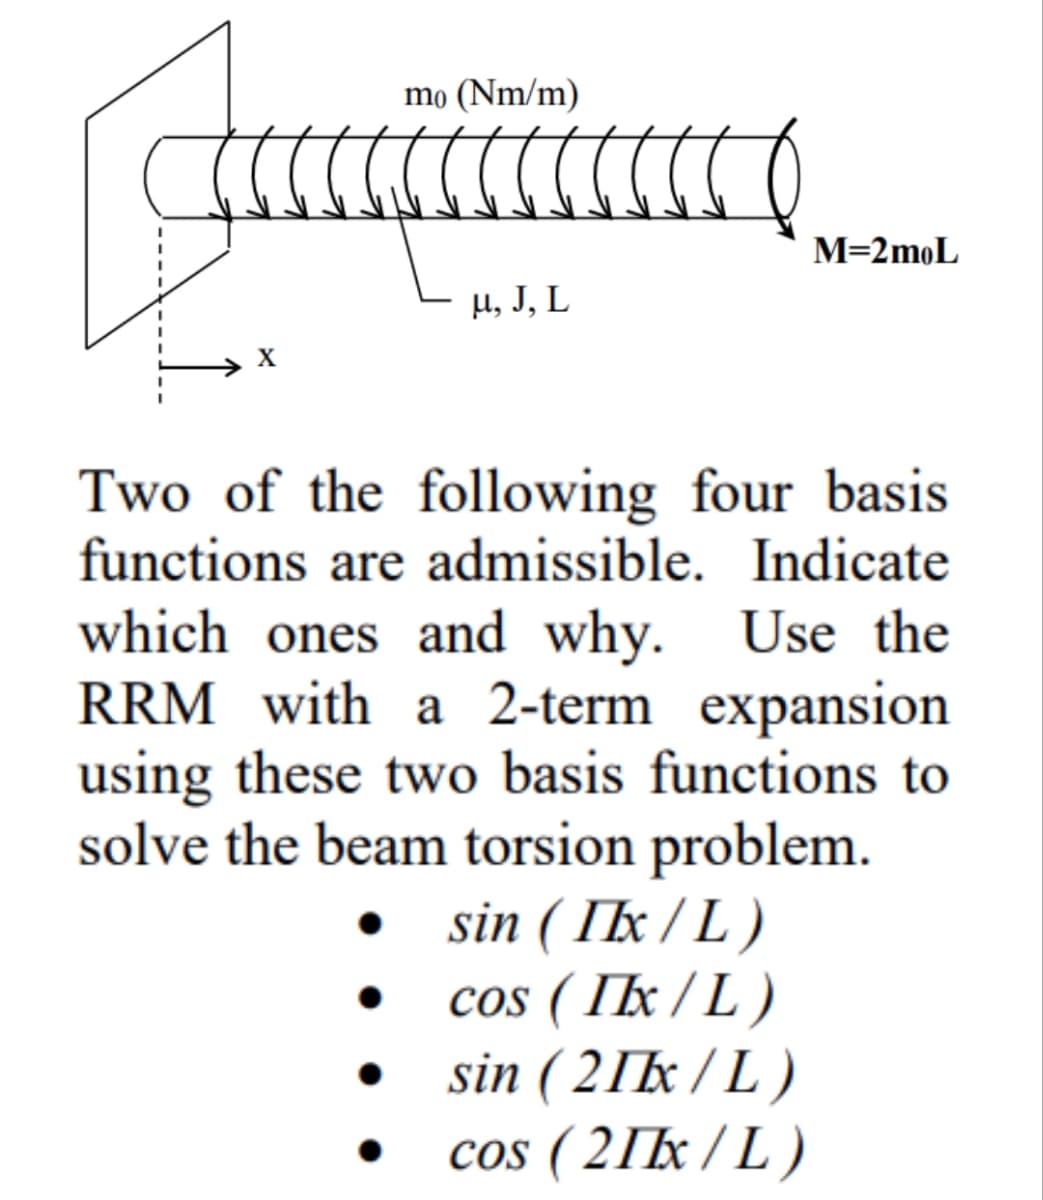 mo (Nm/m)
Jac
M=2moL
H, J, L
X
Two of the following four basis
functions are admissible. Indicate
which ones and why. Use the
RRM with a 2-term expansion
using these two basis functions to
solve the beam torsion problem.
sin (IIx/L)
cos (Ix/L)
sin (21kx/L)
cos (21kx/L)